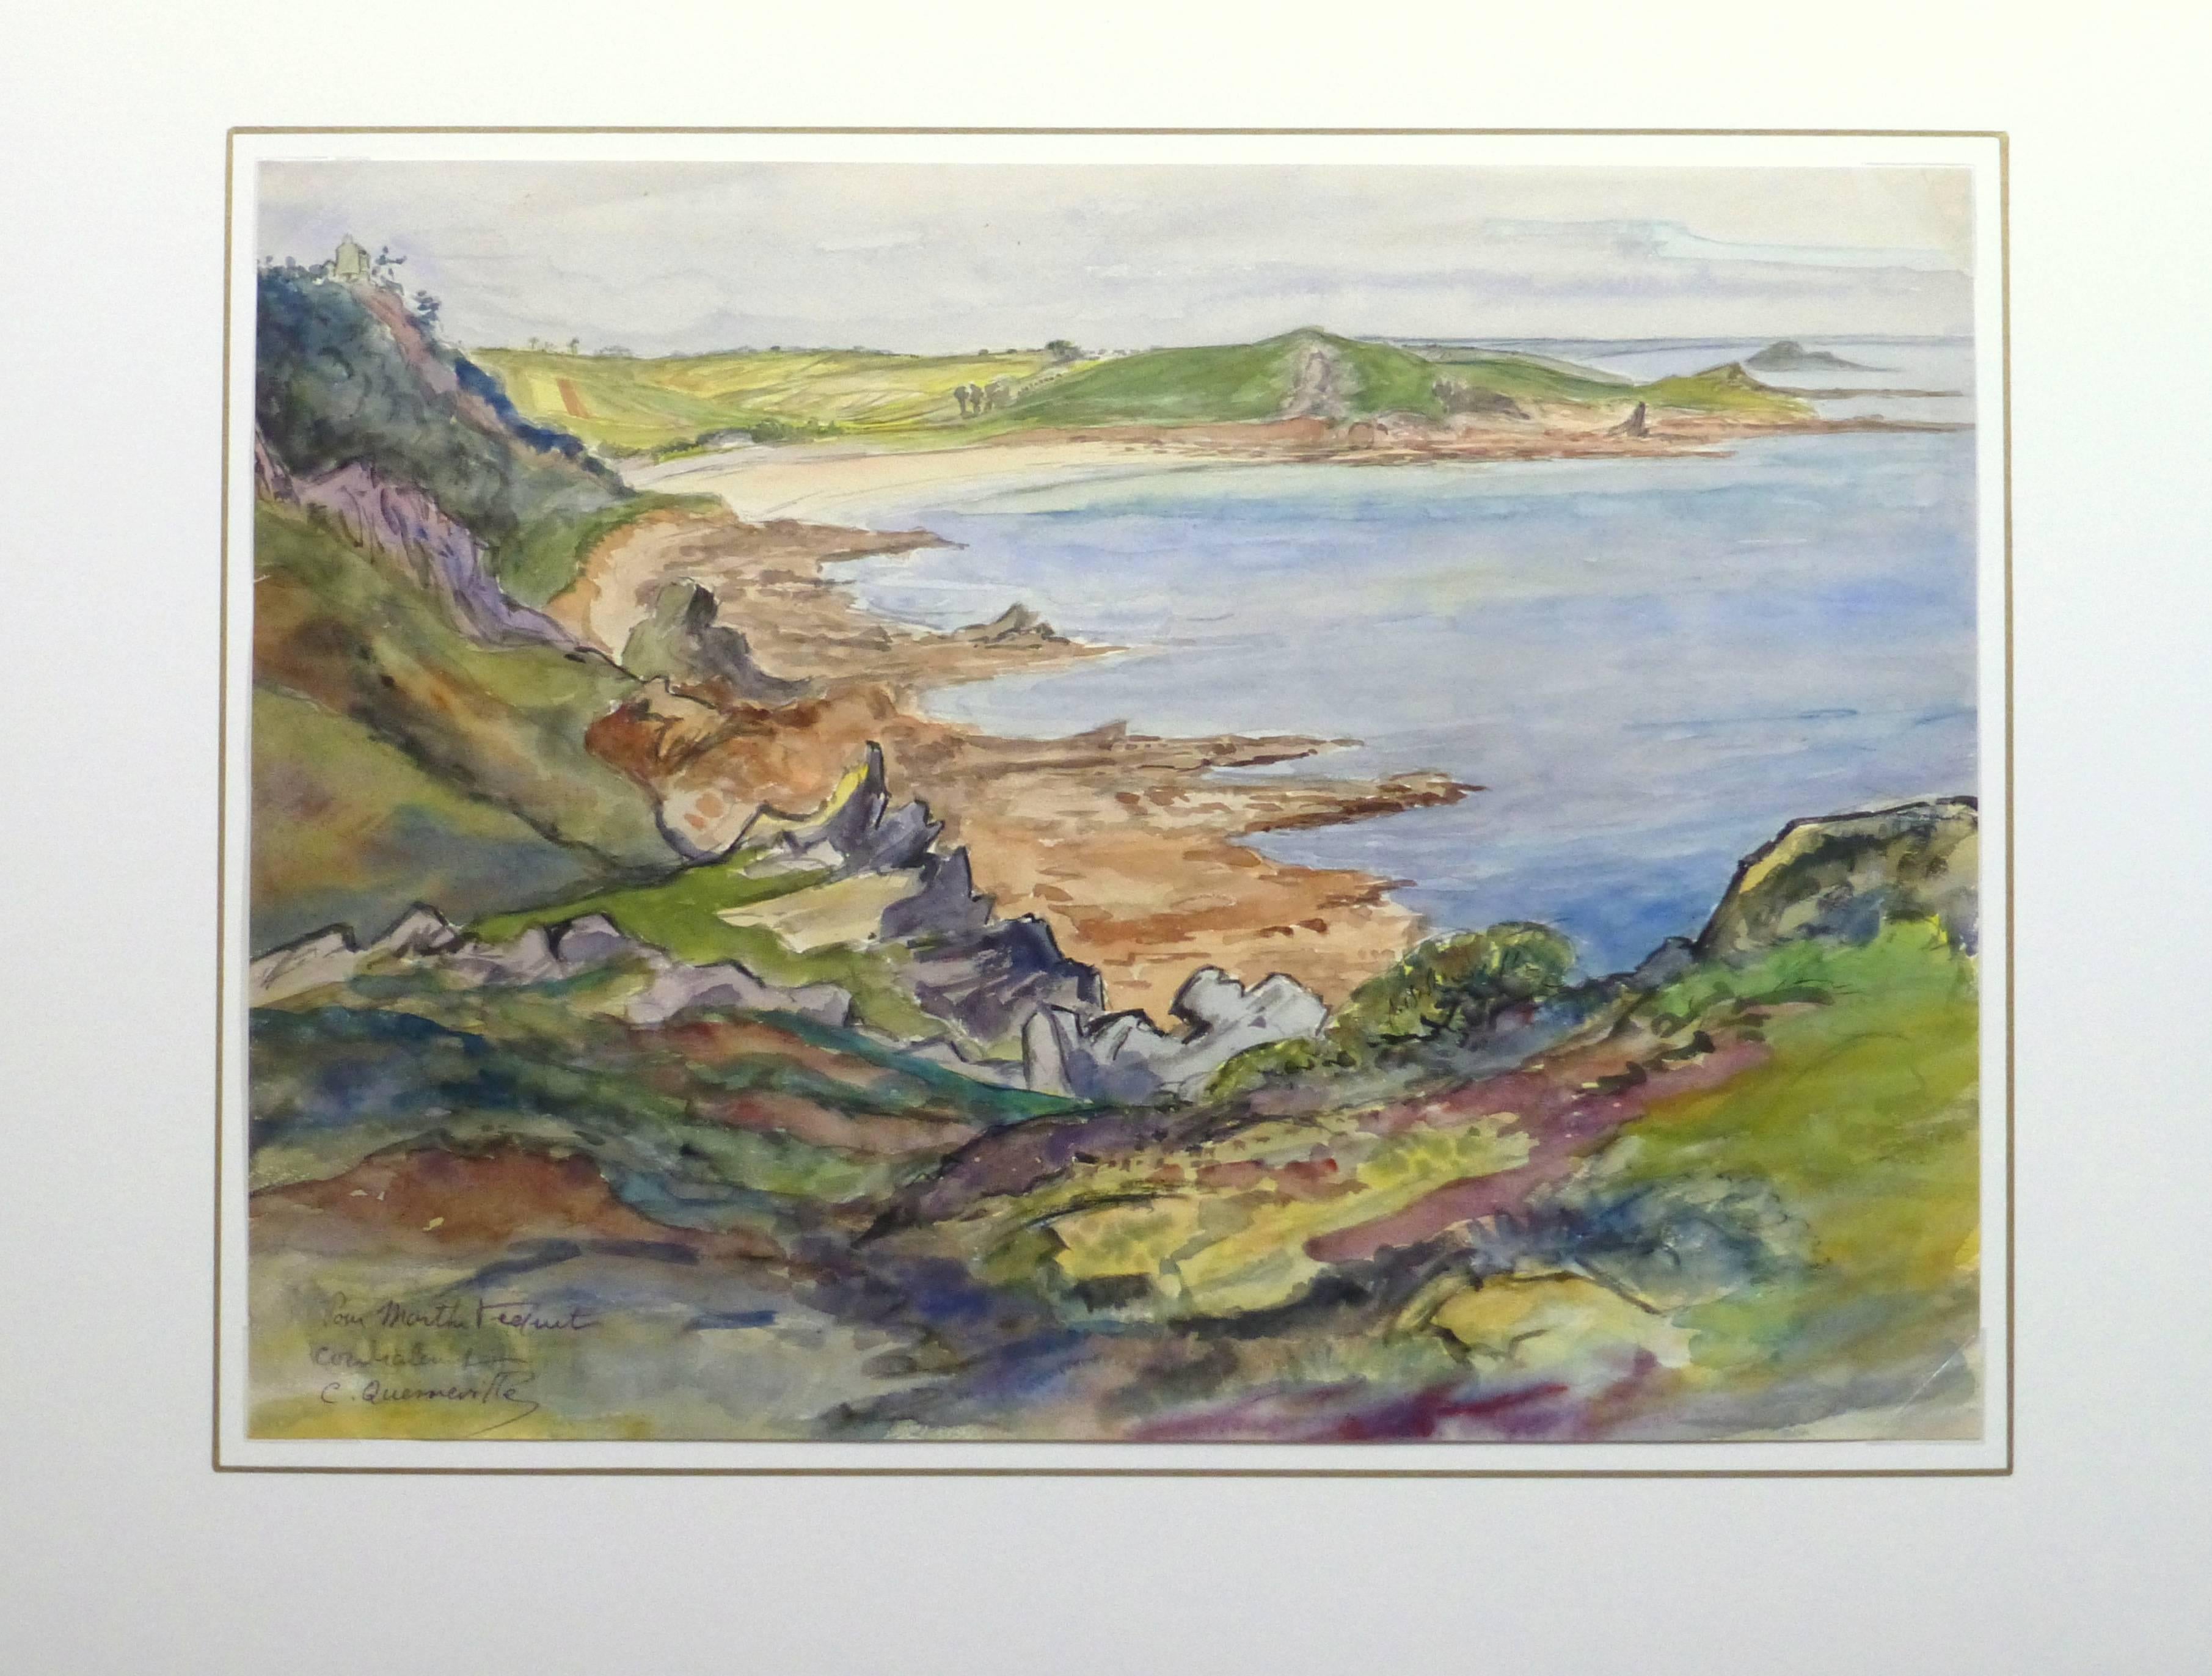 Relaxing watercolor seascape of the varied coastline along Le Guerzit, France by artist C. Querneville, circa 1940. Titled and signed lower left. 

Original artwork on paper displayed on a white mat with a gold border. Archival plastic sleeve and